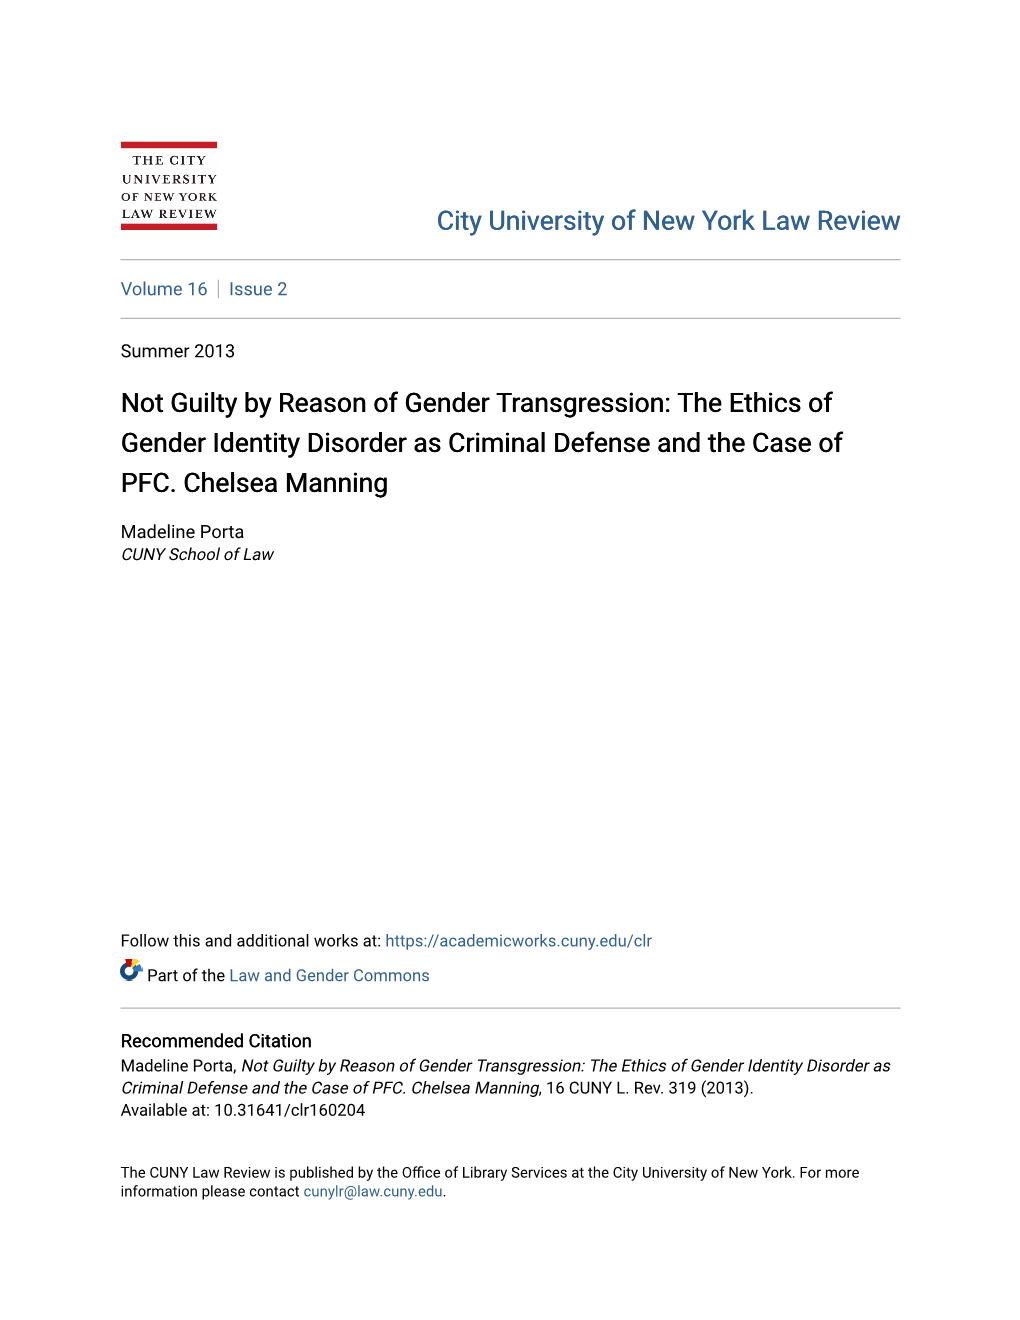 The Ethics of Gender Identity Disorder As Criminal Defense and the Case of PFC